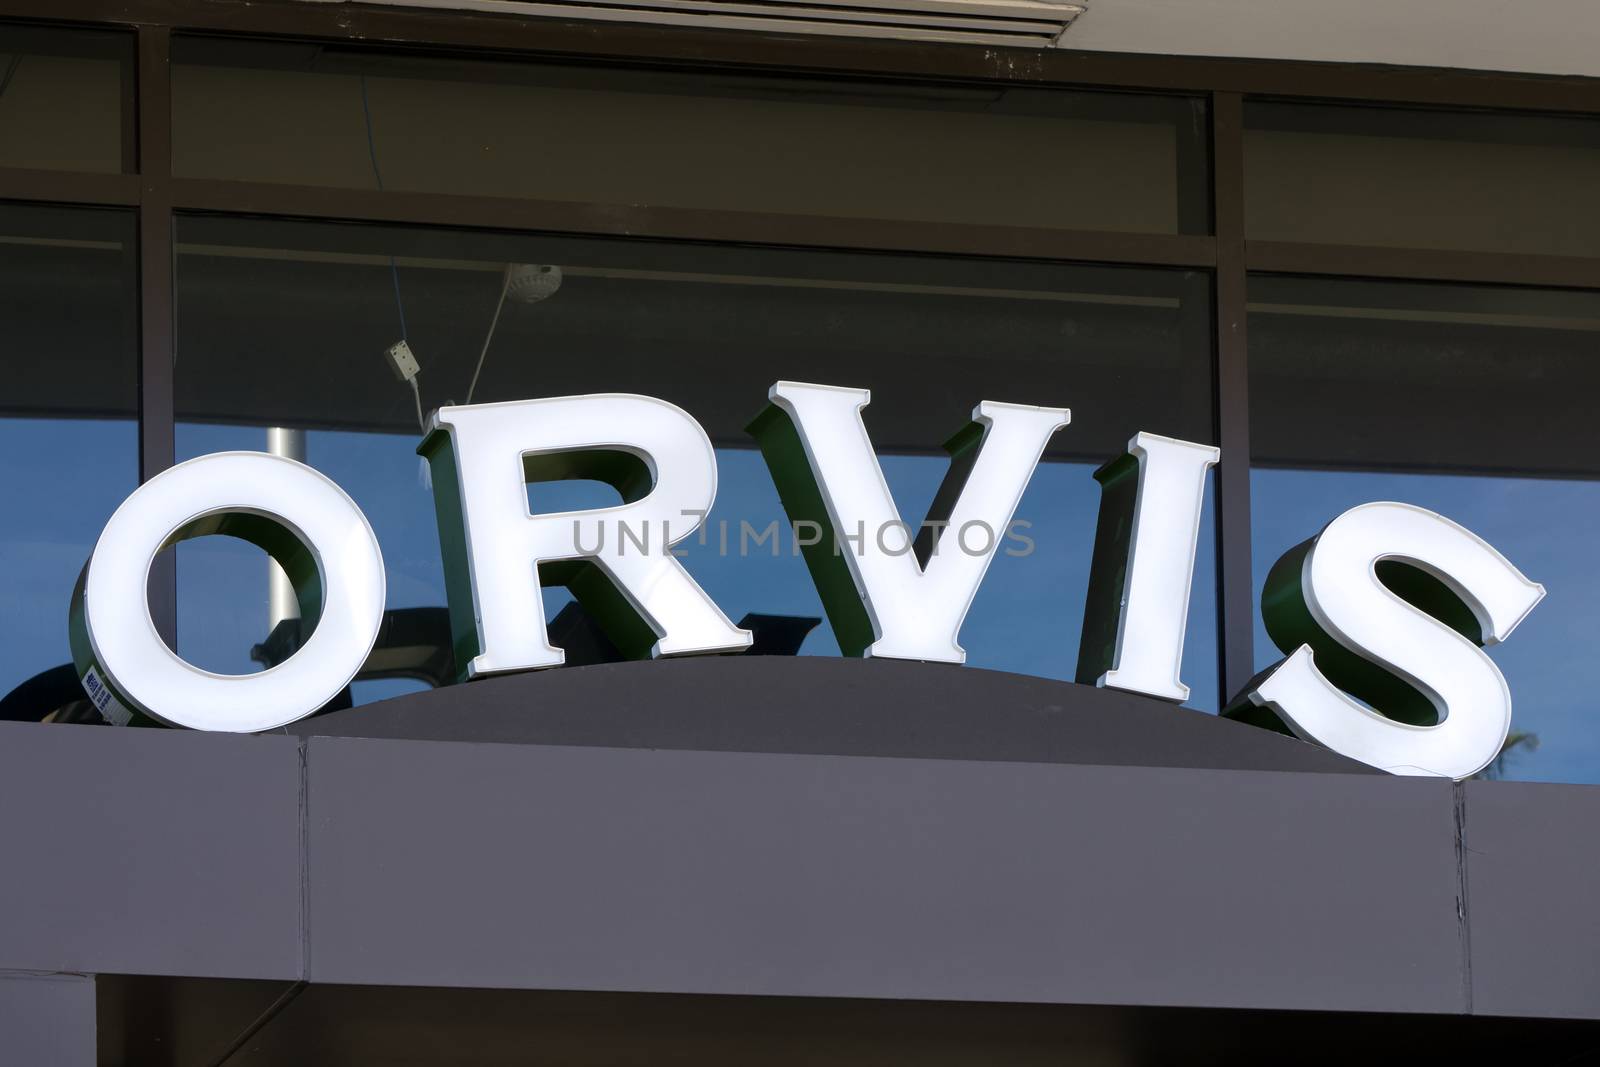 PASADEDNA, CA/USA - NOVEMBER 22, 2015: Orvus retail store exterior and logo. Orvis is a retail and mail-order business sporting goods.